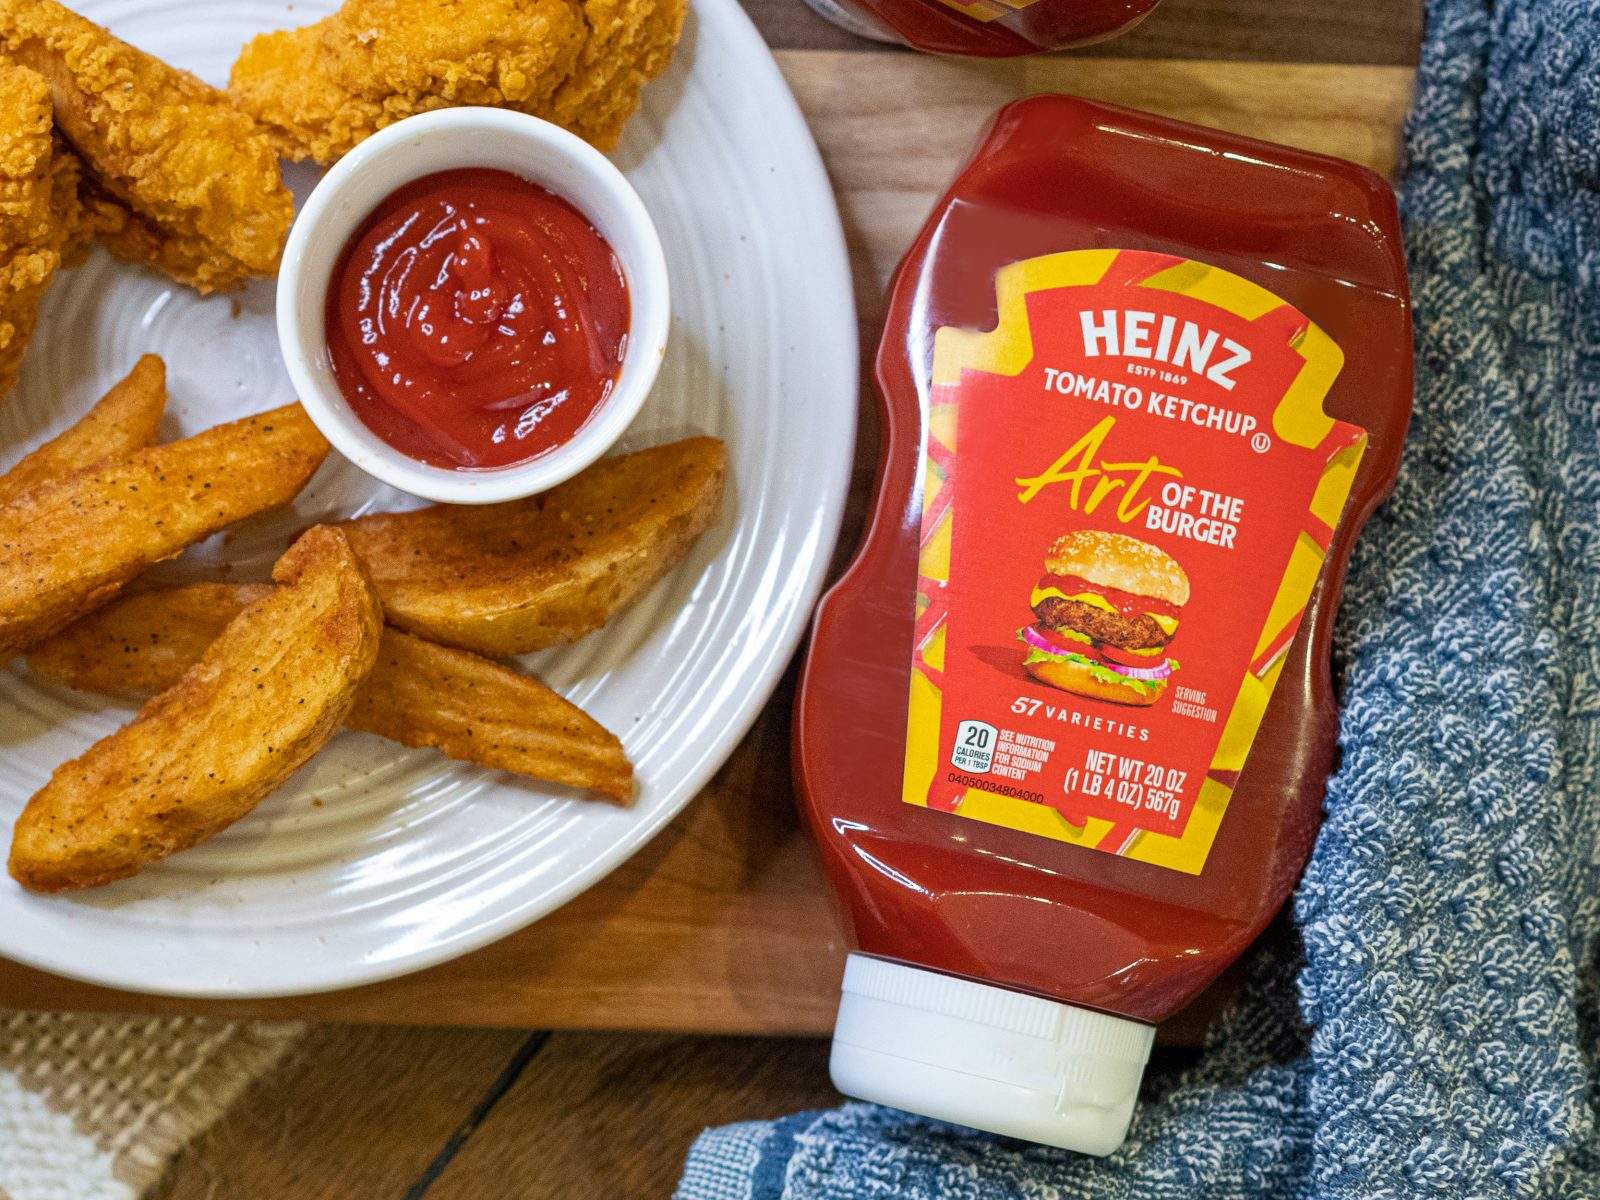 Heinz Ketchup As Low As FREE At Publix